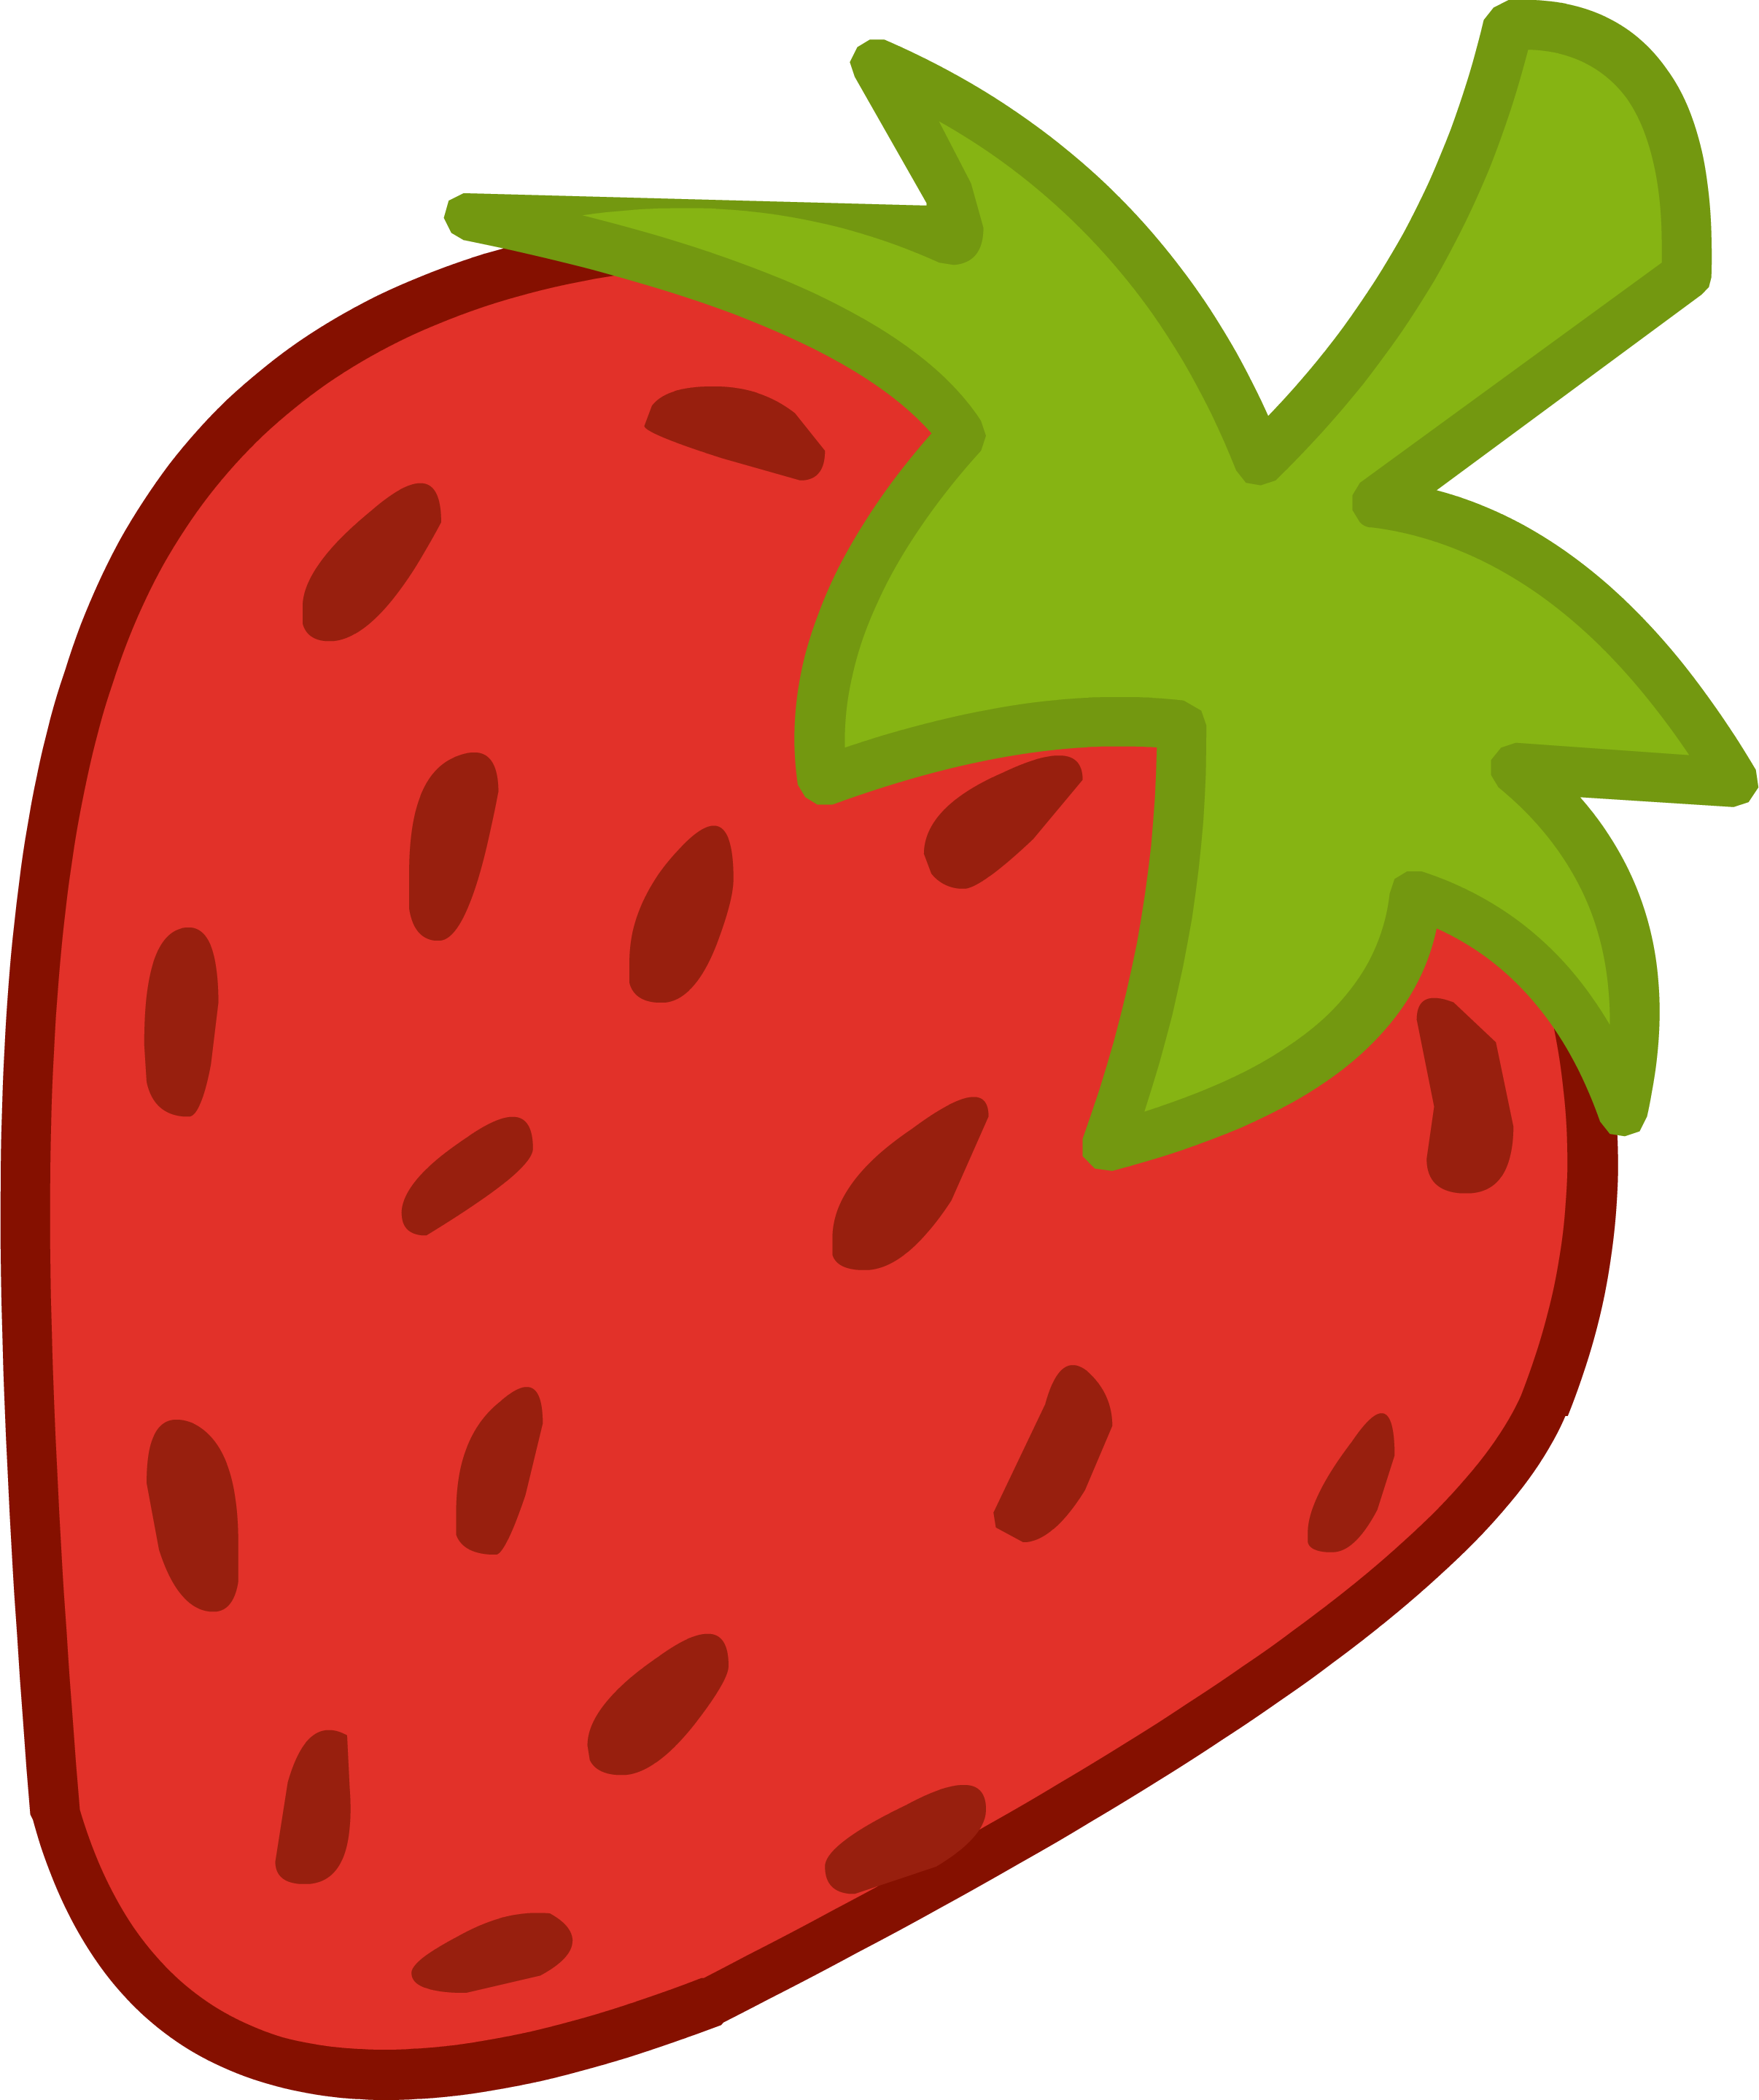 Strawberry Fruit Clipart 1 